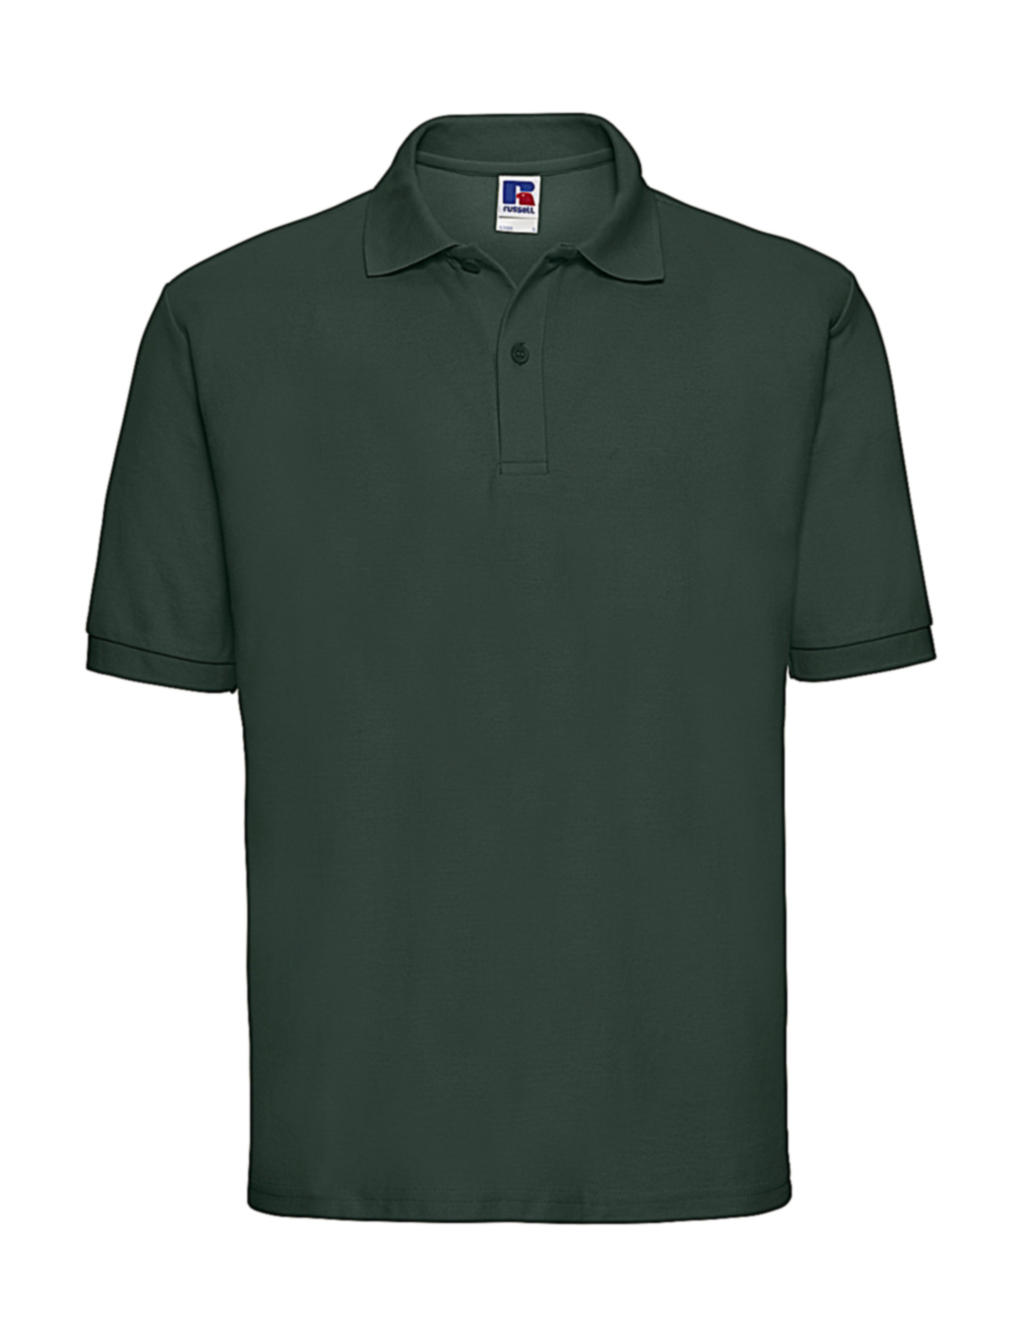  Mens Classic Polycotton Polo in Farbe Bottle Green